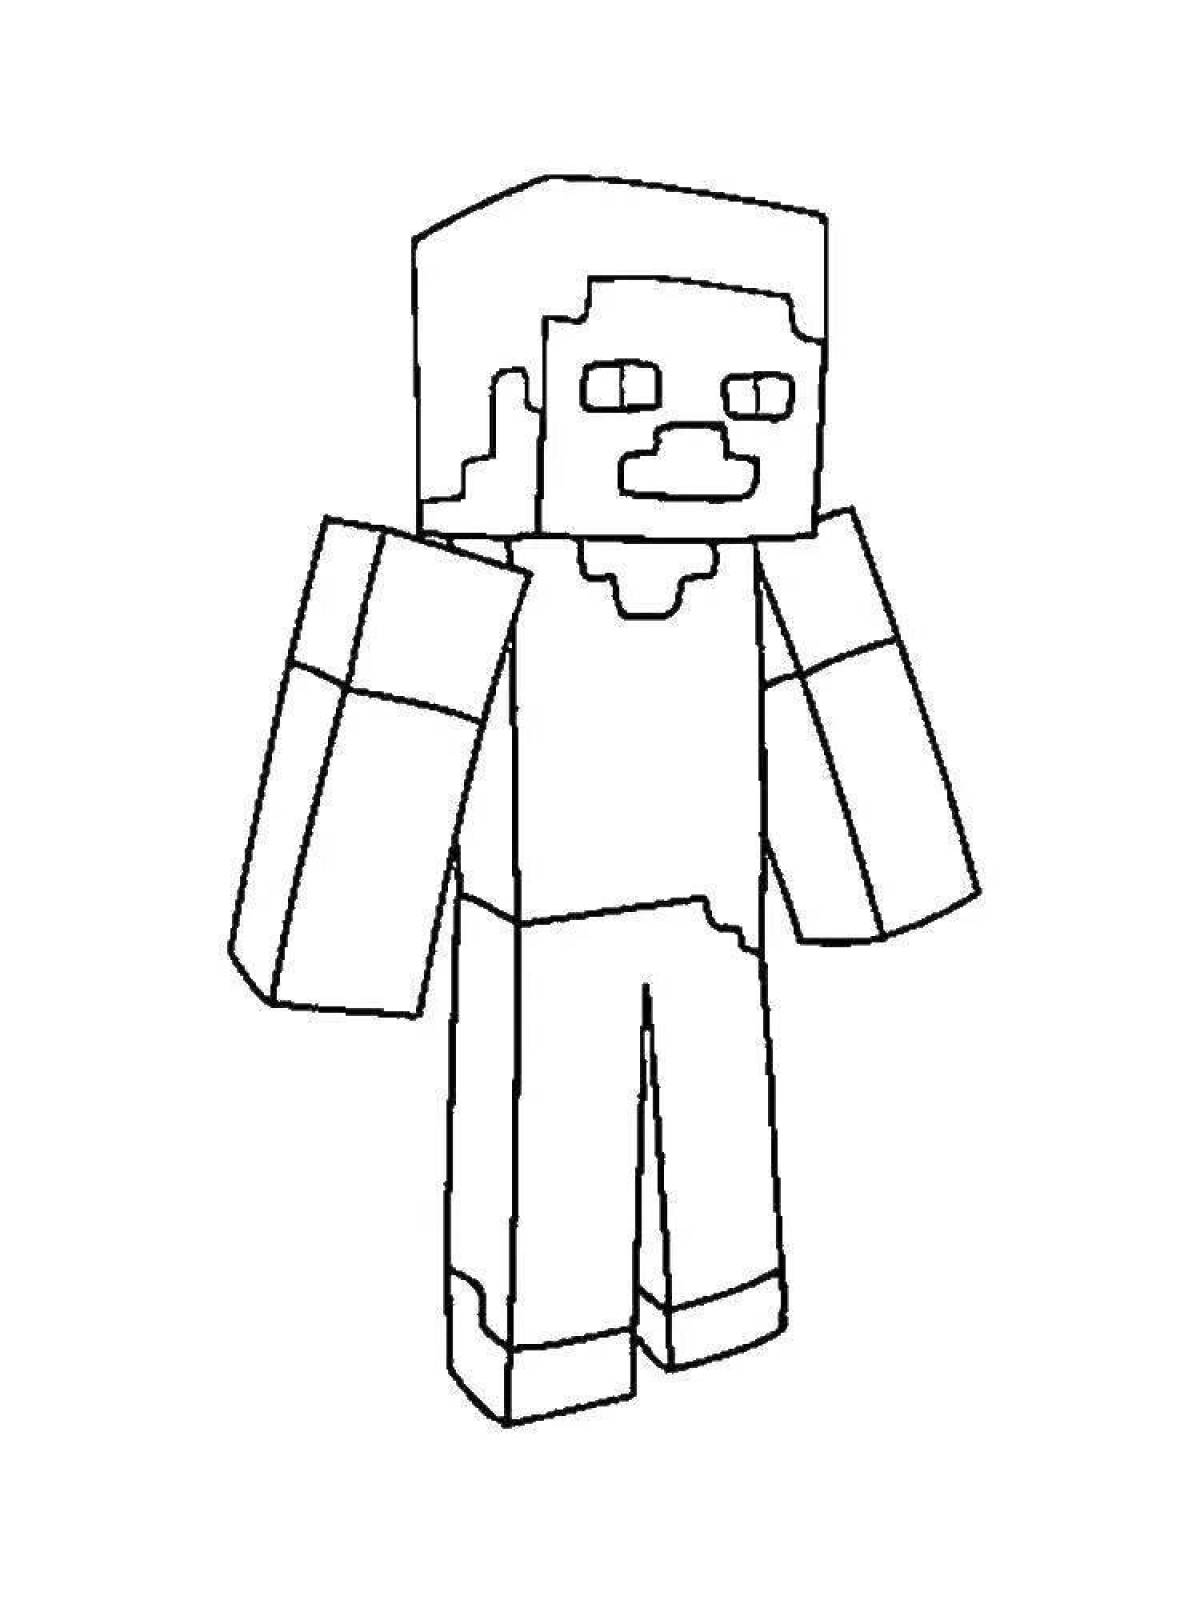 Minecraft coloring pages for men with crazy colors